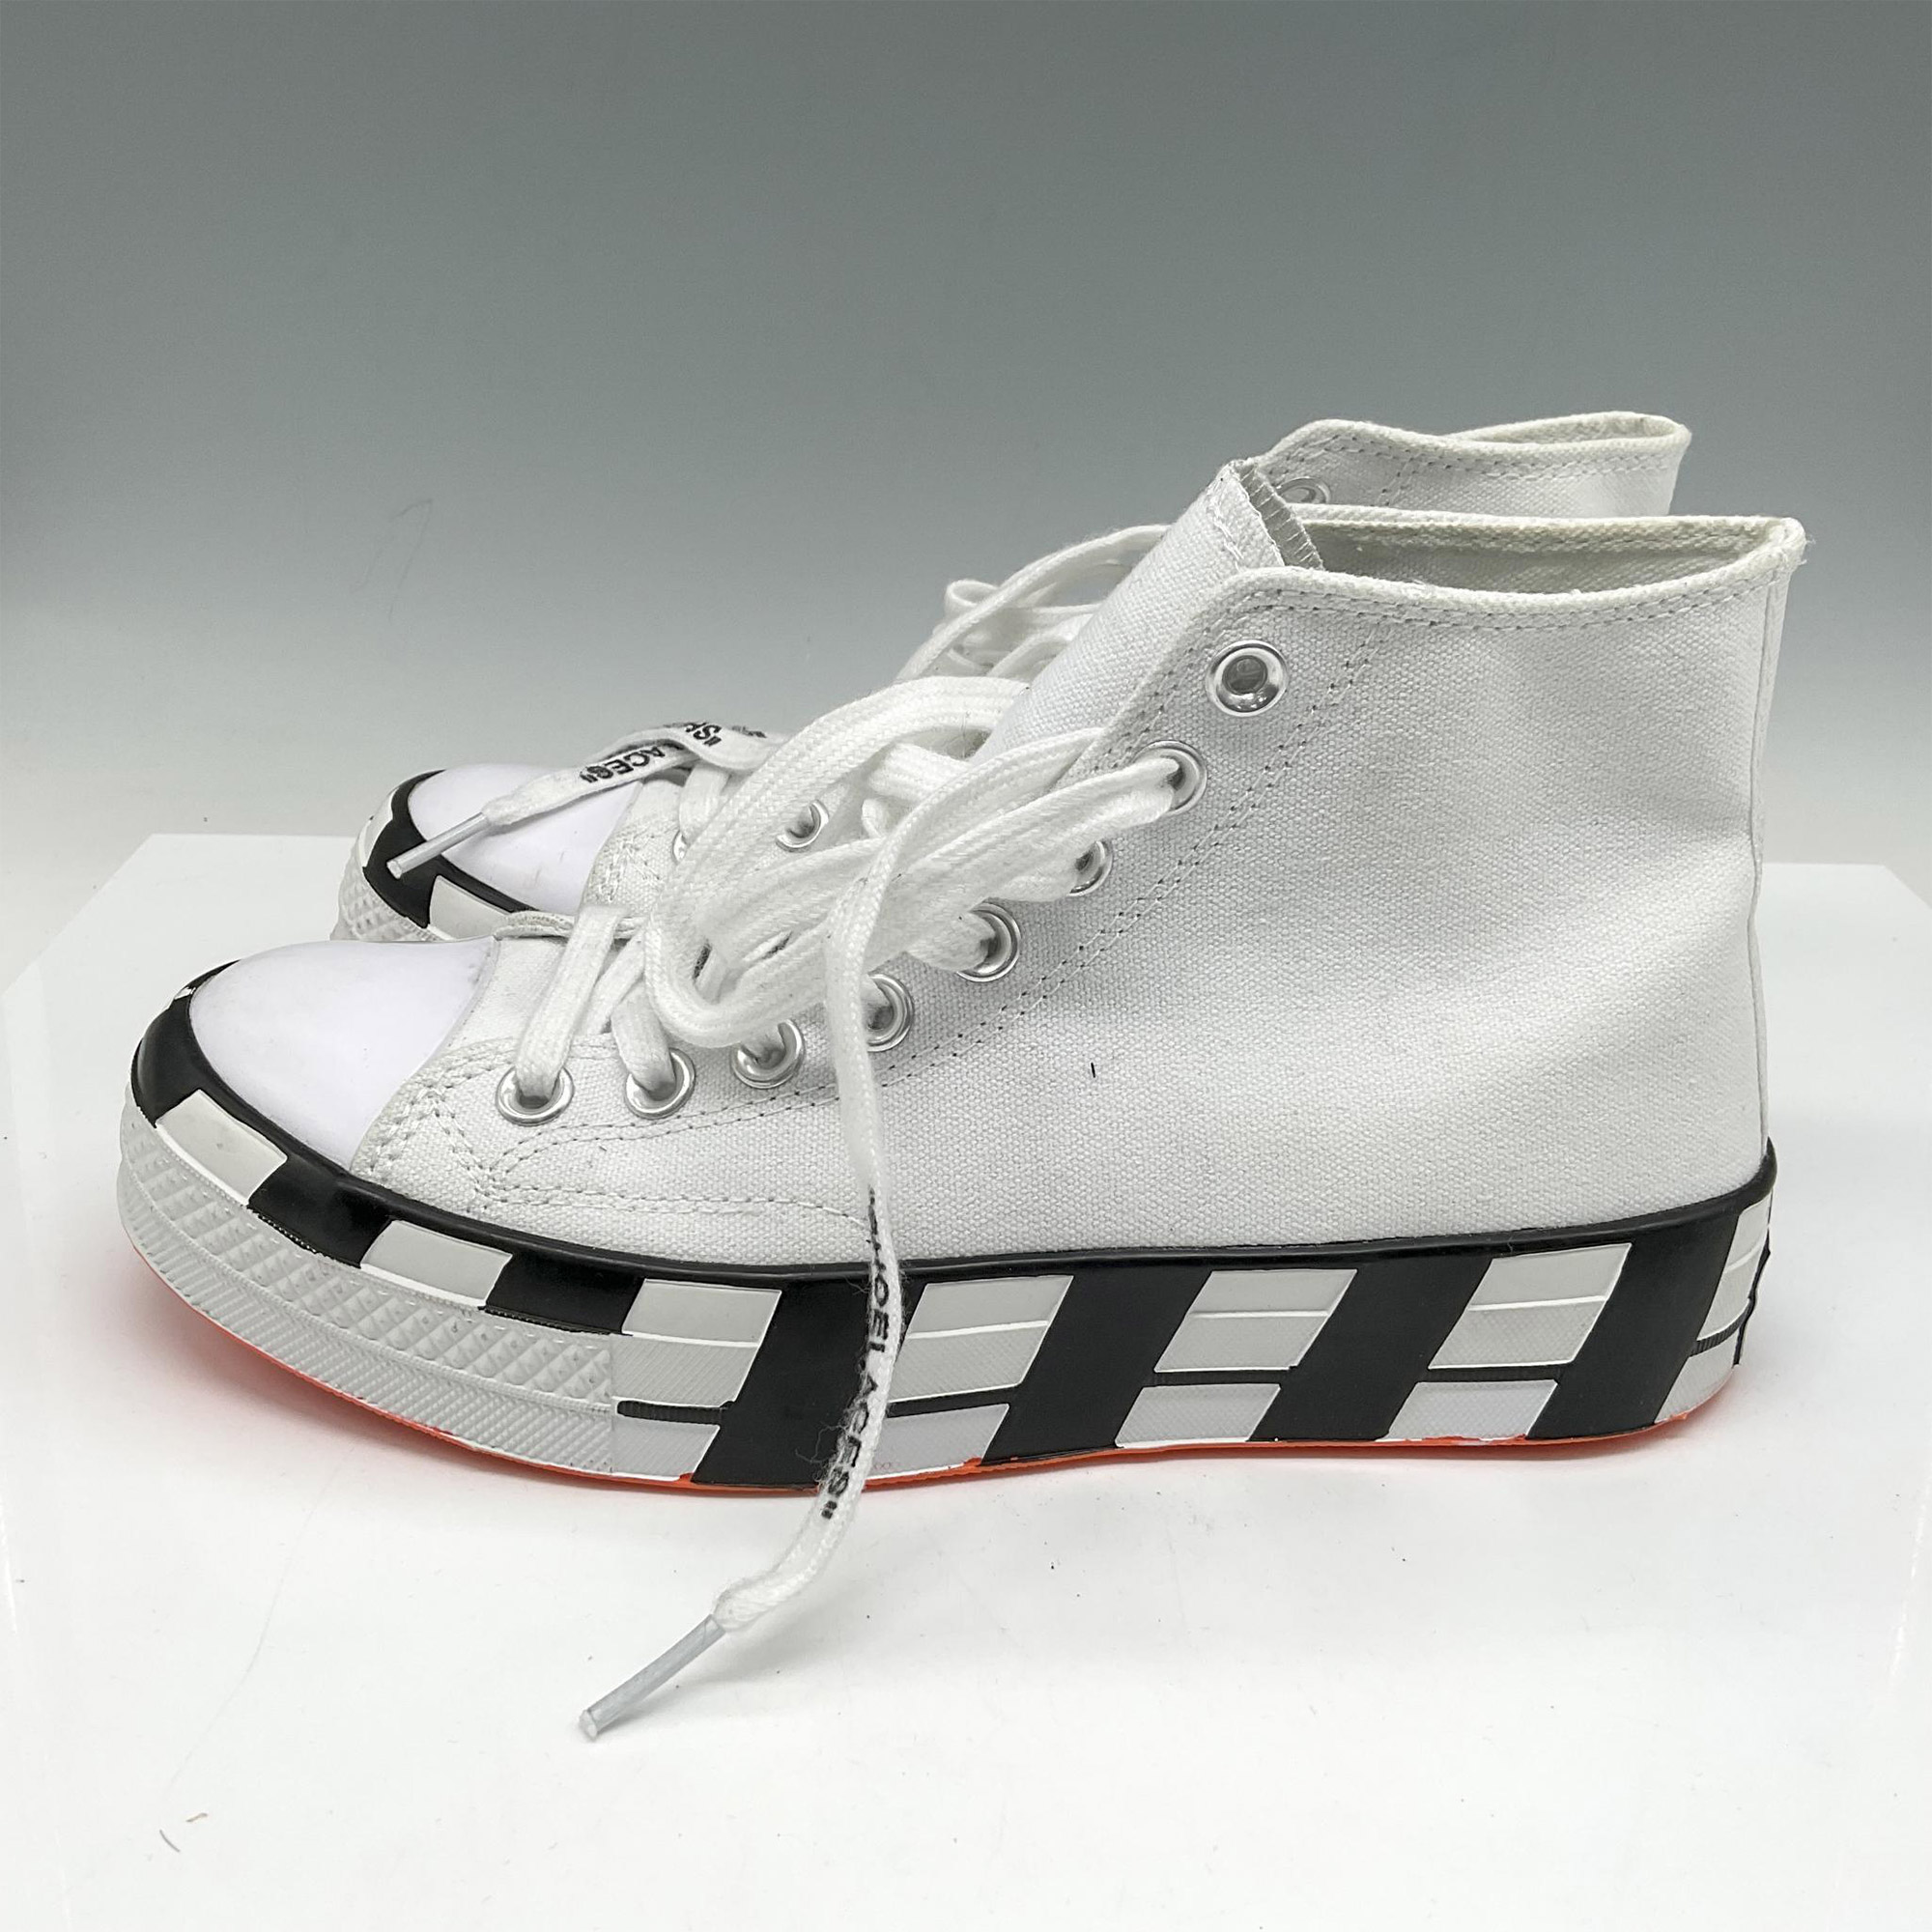 Converse Off-White Virgil Abloh Chuck 70 Sneakers - Image 4 of 6